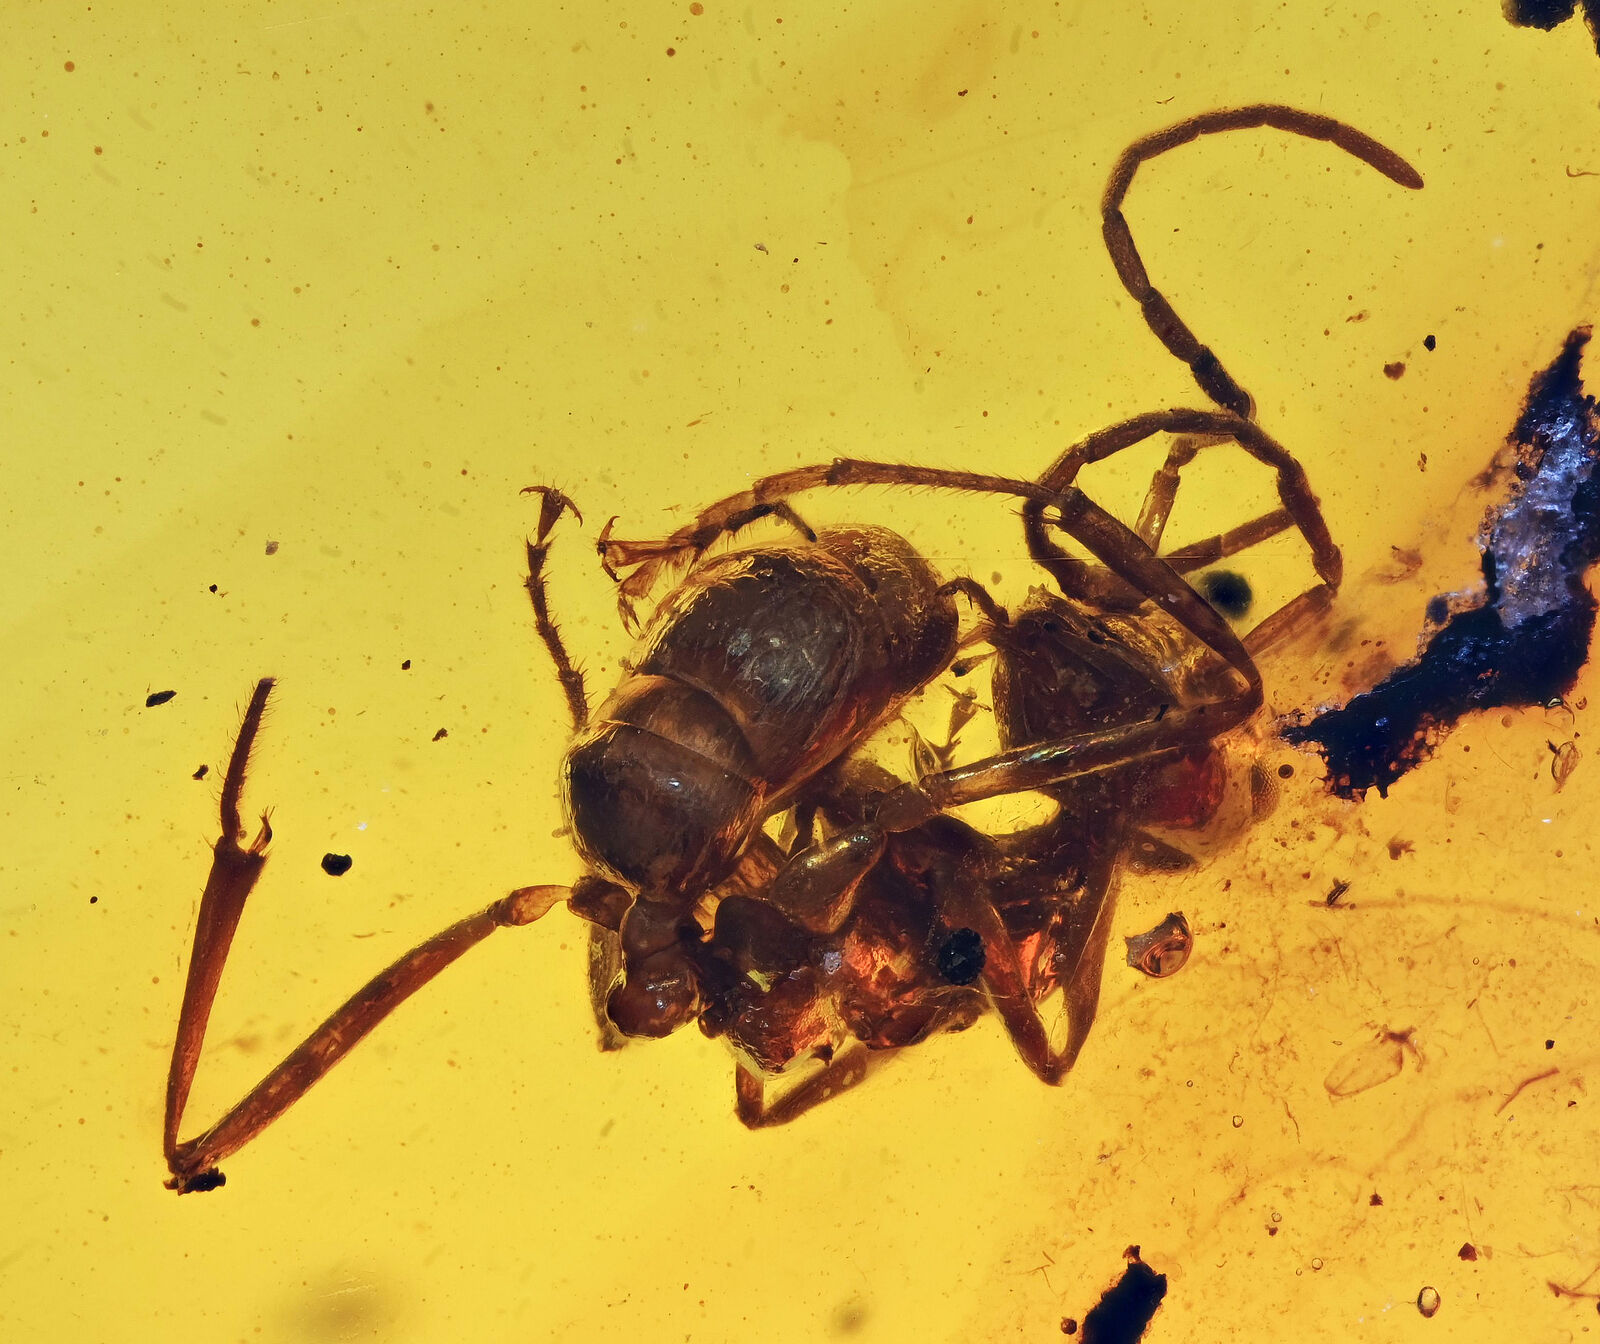 Extinct Sphecomyrma Ant, Fossil insect inclusion in Burmese Amber